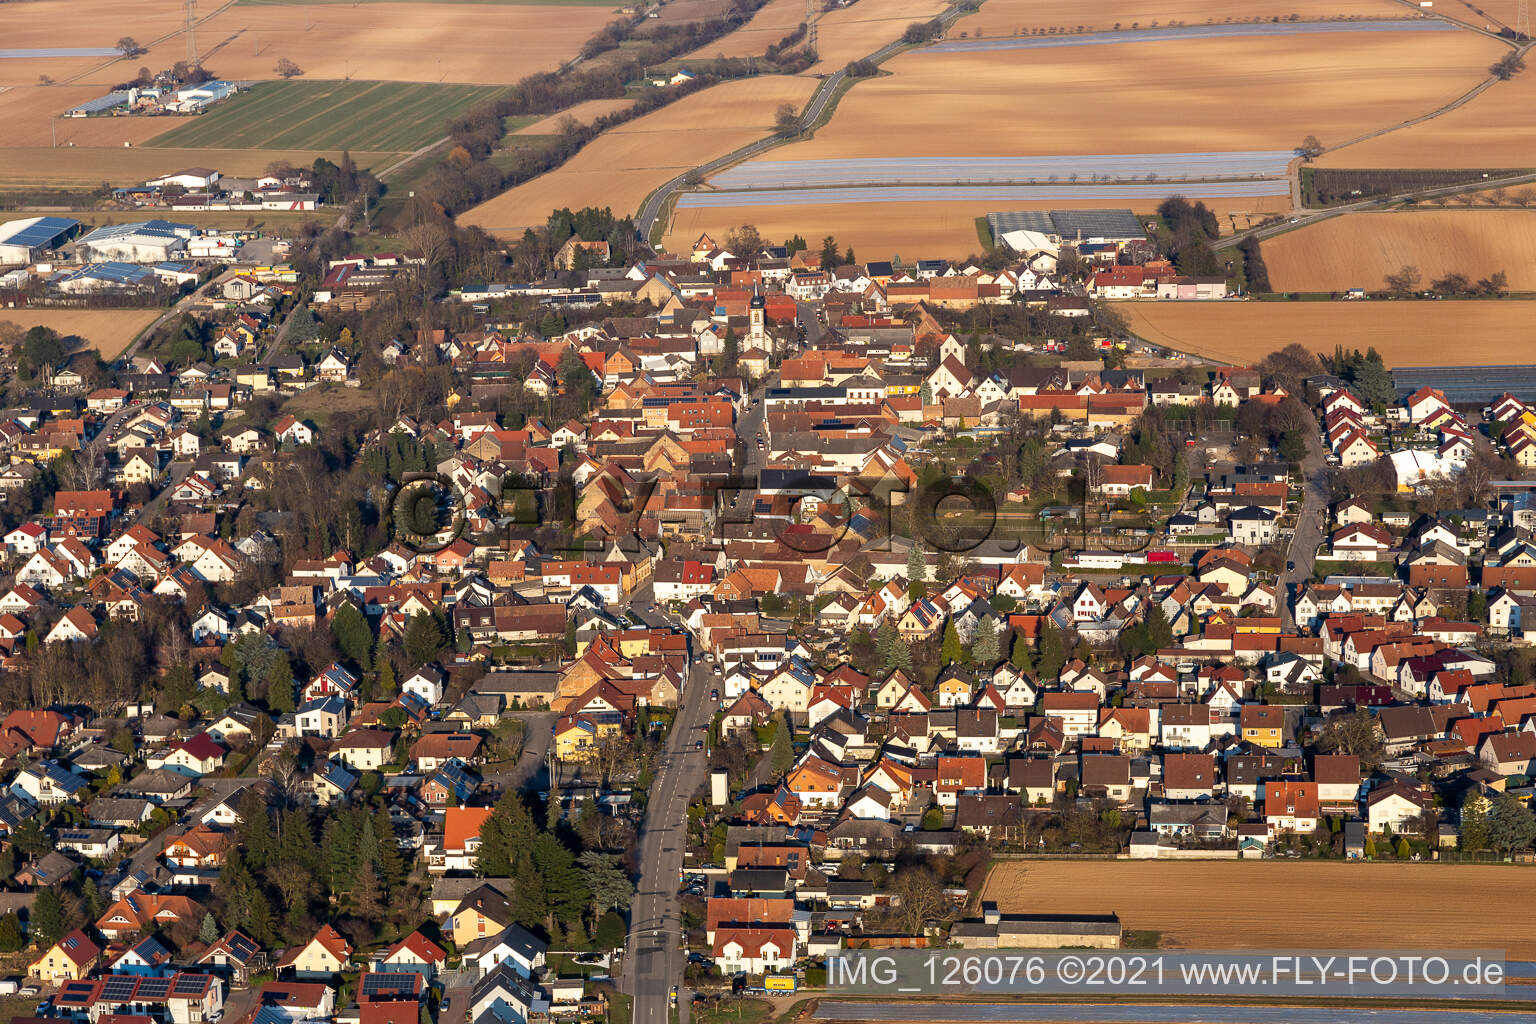 Weingarten in the state Rhineland-Palatinate, Germany seen from a drone